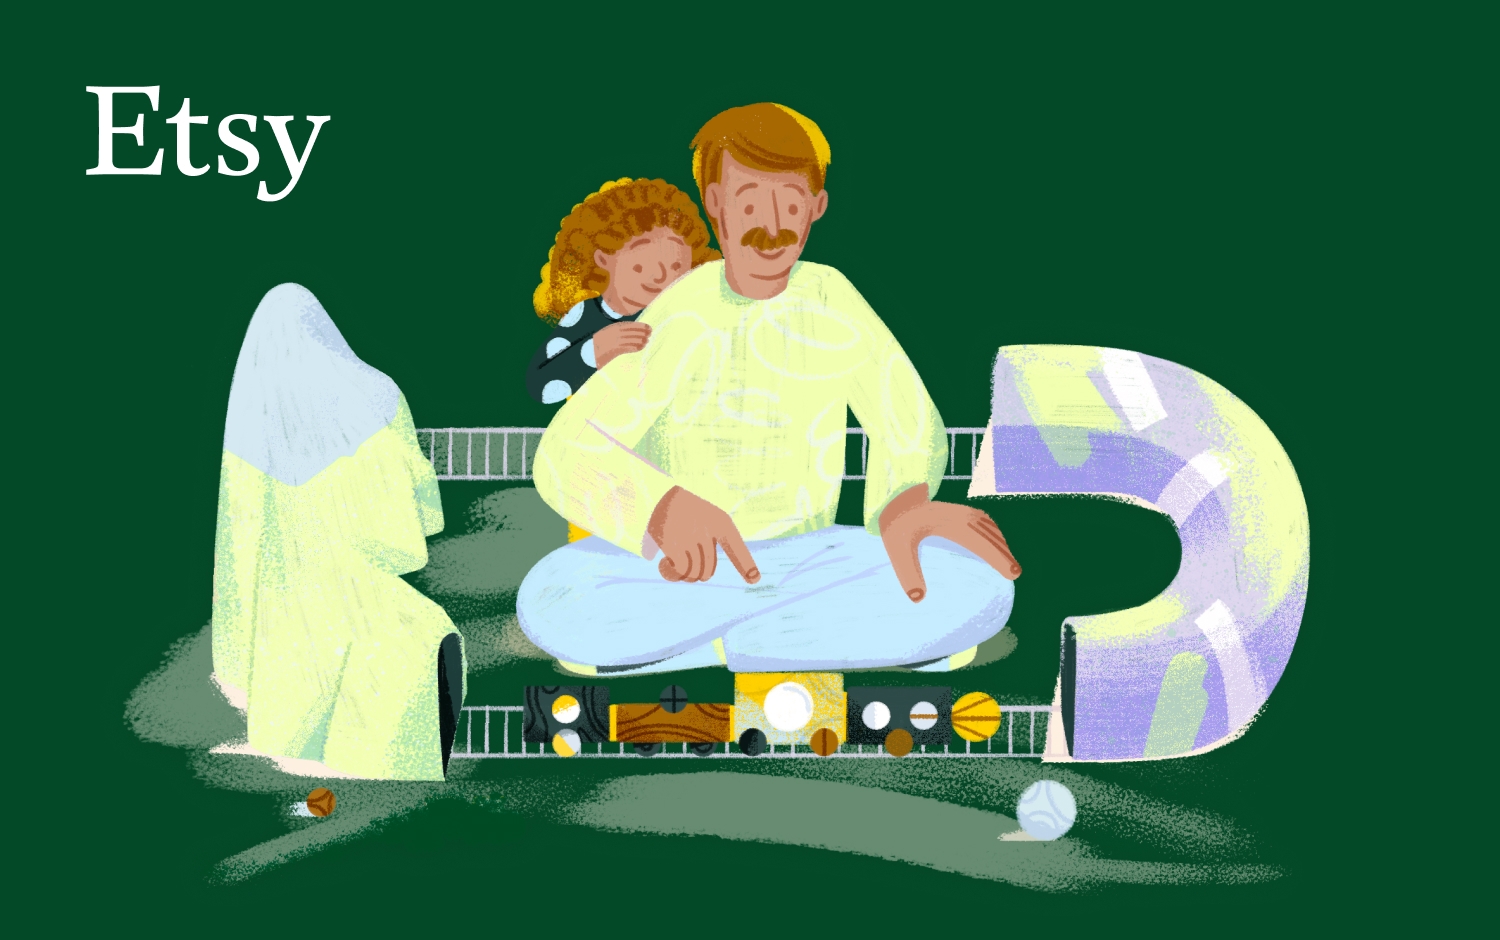 Illustration of a man with a mustache and a child with curly hair, sitting together on a green floor. The man is wearing a white shirt and light blue pants, and the child is leaning on his back, wearing a black and white outfit. They are surrounded by various toys, including a toy train set weaving through a tunnel and past mountains, and a toy ball. The scene is set against a dark green background with the Etsy logo in white font in the top left corner